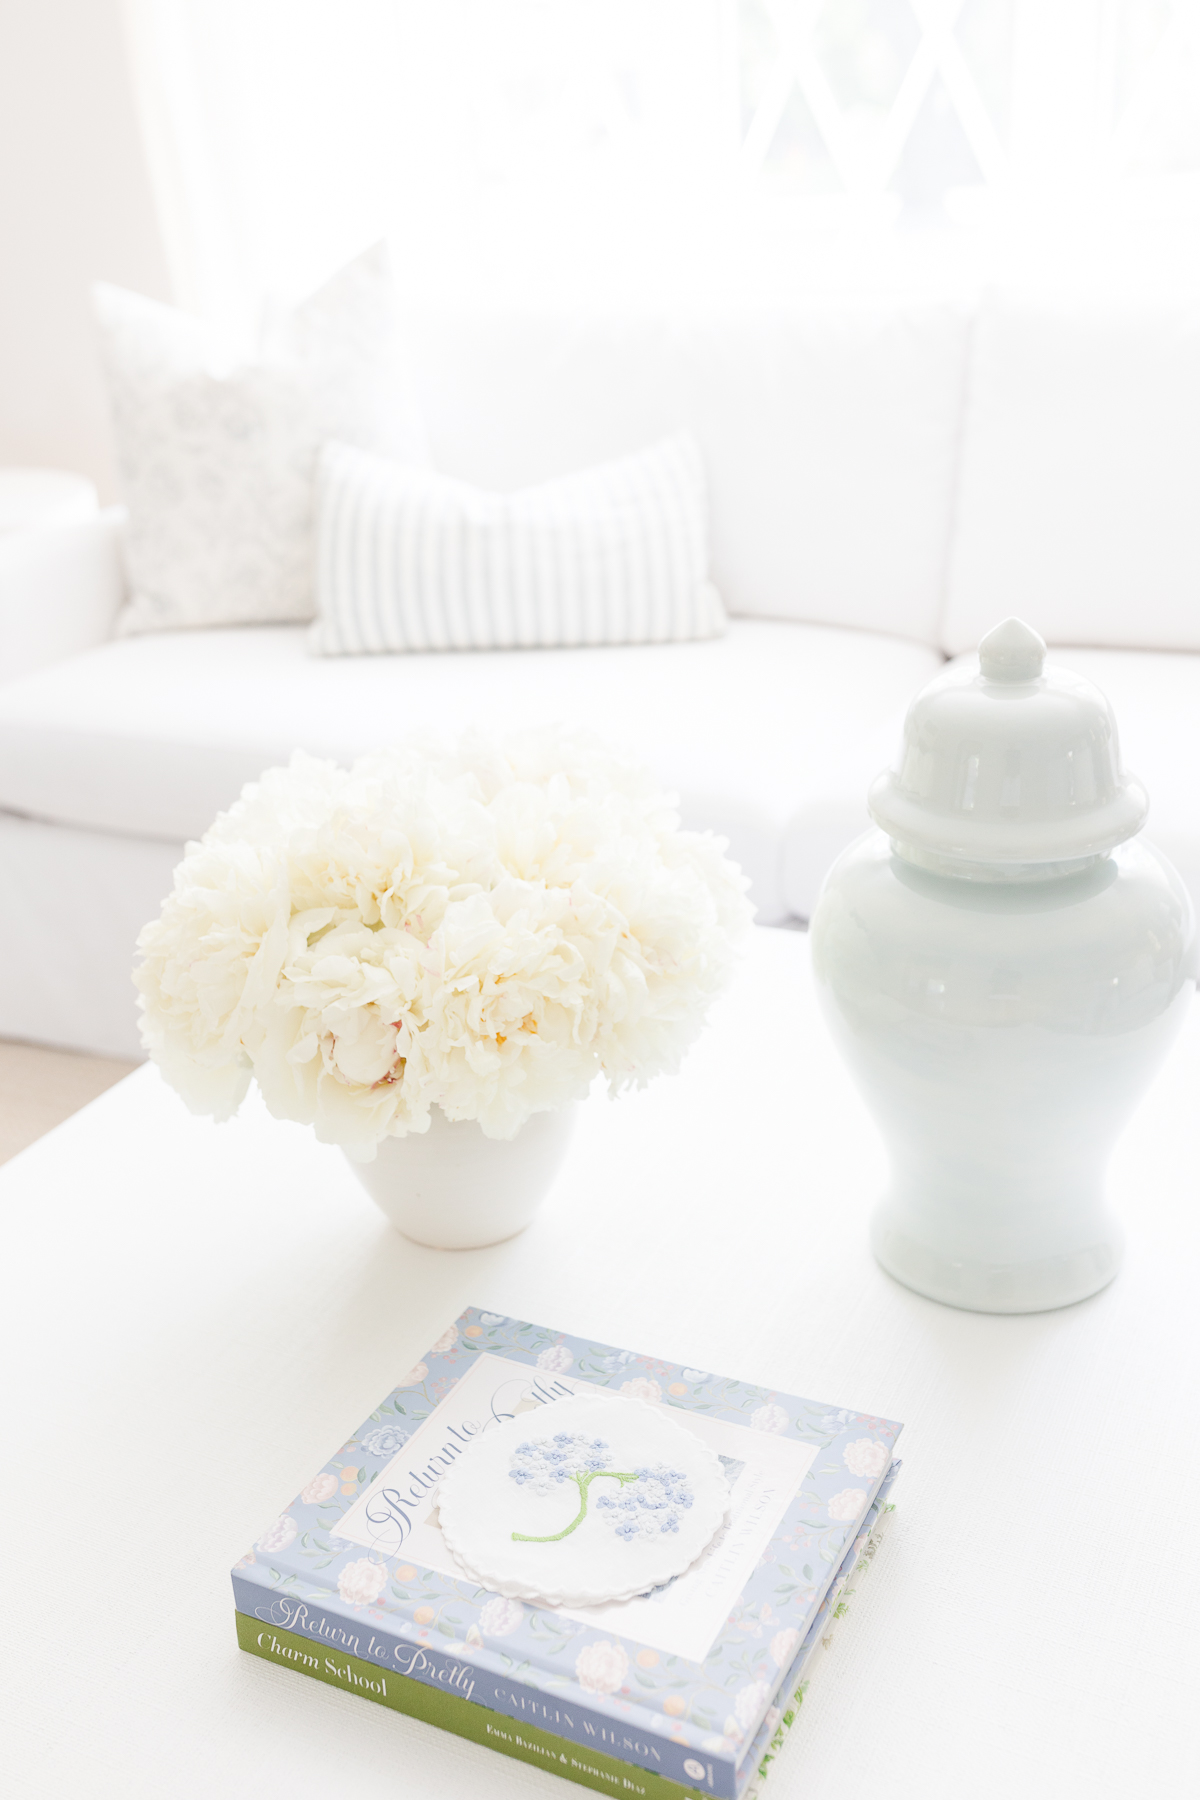 A white living room with an arrangement of white Trader Joe's flowers in a vase on the coffee table.